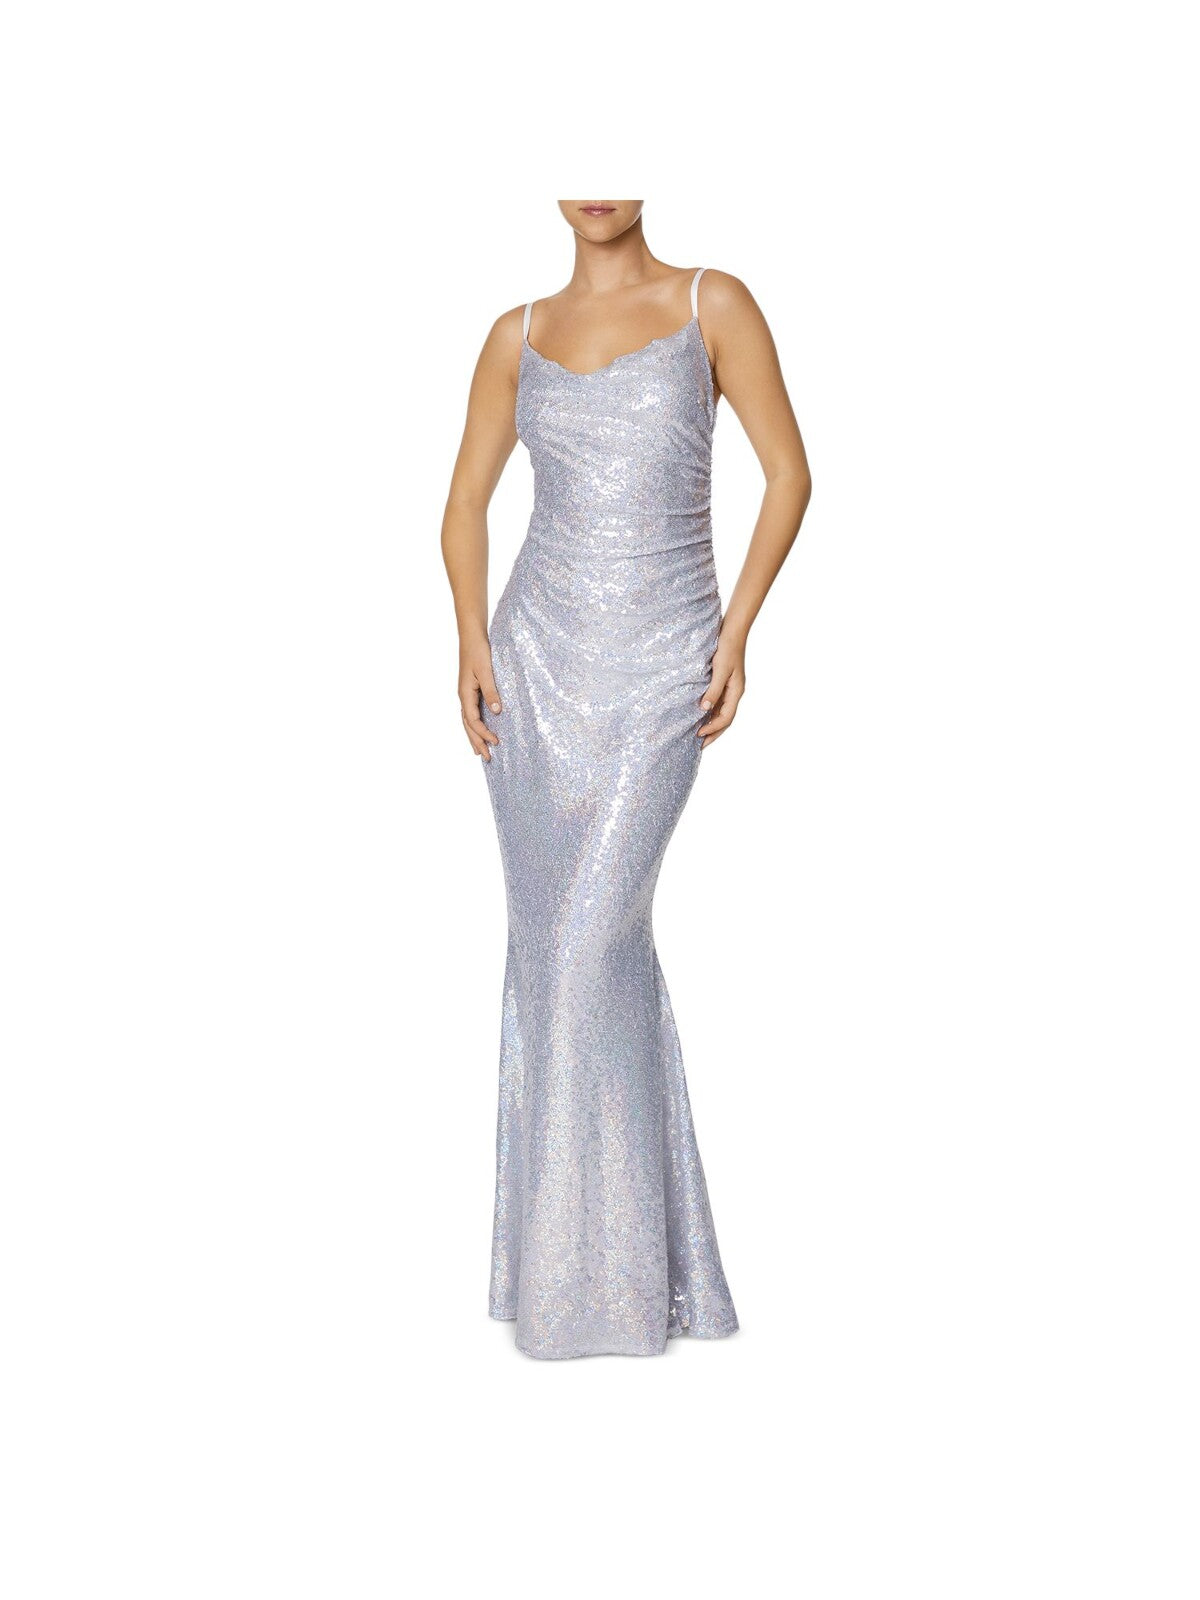 LAUNDRY Womens Silver Stretch Sequined Zippered Adjustable Straps Lined Sleeveless Cowl Neck Full-Length Formal Mermaid Dress 6